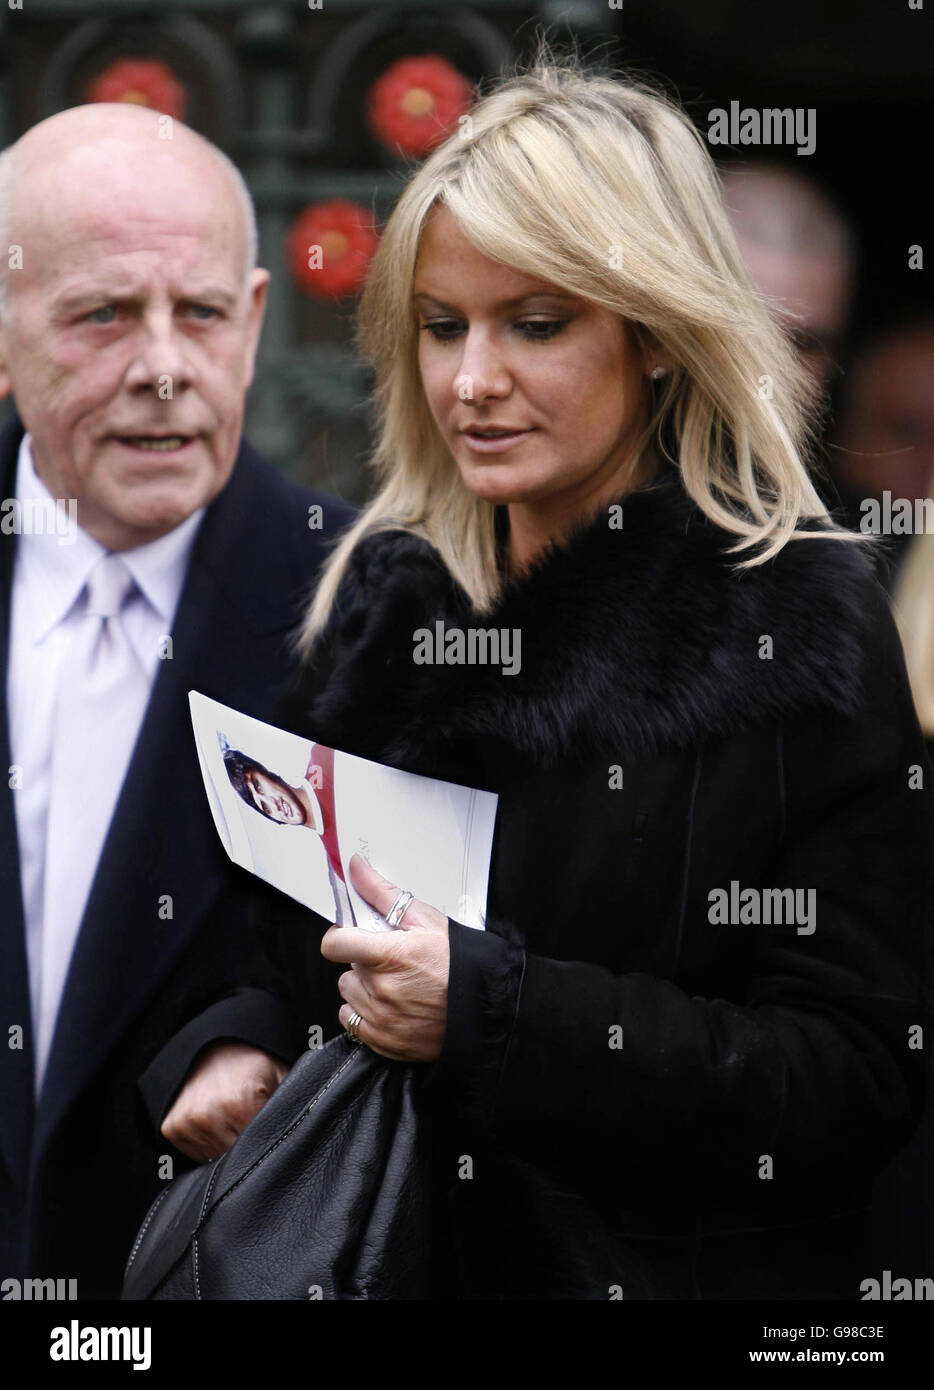 Alex Best leaves the memorial service for football legend George Best, at Manchester Cathedral, Thursday March 16, 2006. Former Manchester United and Northern Ireland great Best succumbed to multiple organ failure on November 25 last year at the Cromwell Hospital in west London, following years of alcohol abuse. See PA Story MEMORIAL Best. PRESS ASSOCIATION Photo. Photo credit should read: Peter Byrne/PA. Stock Photo